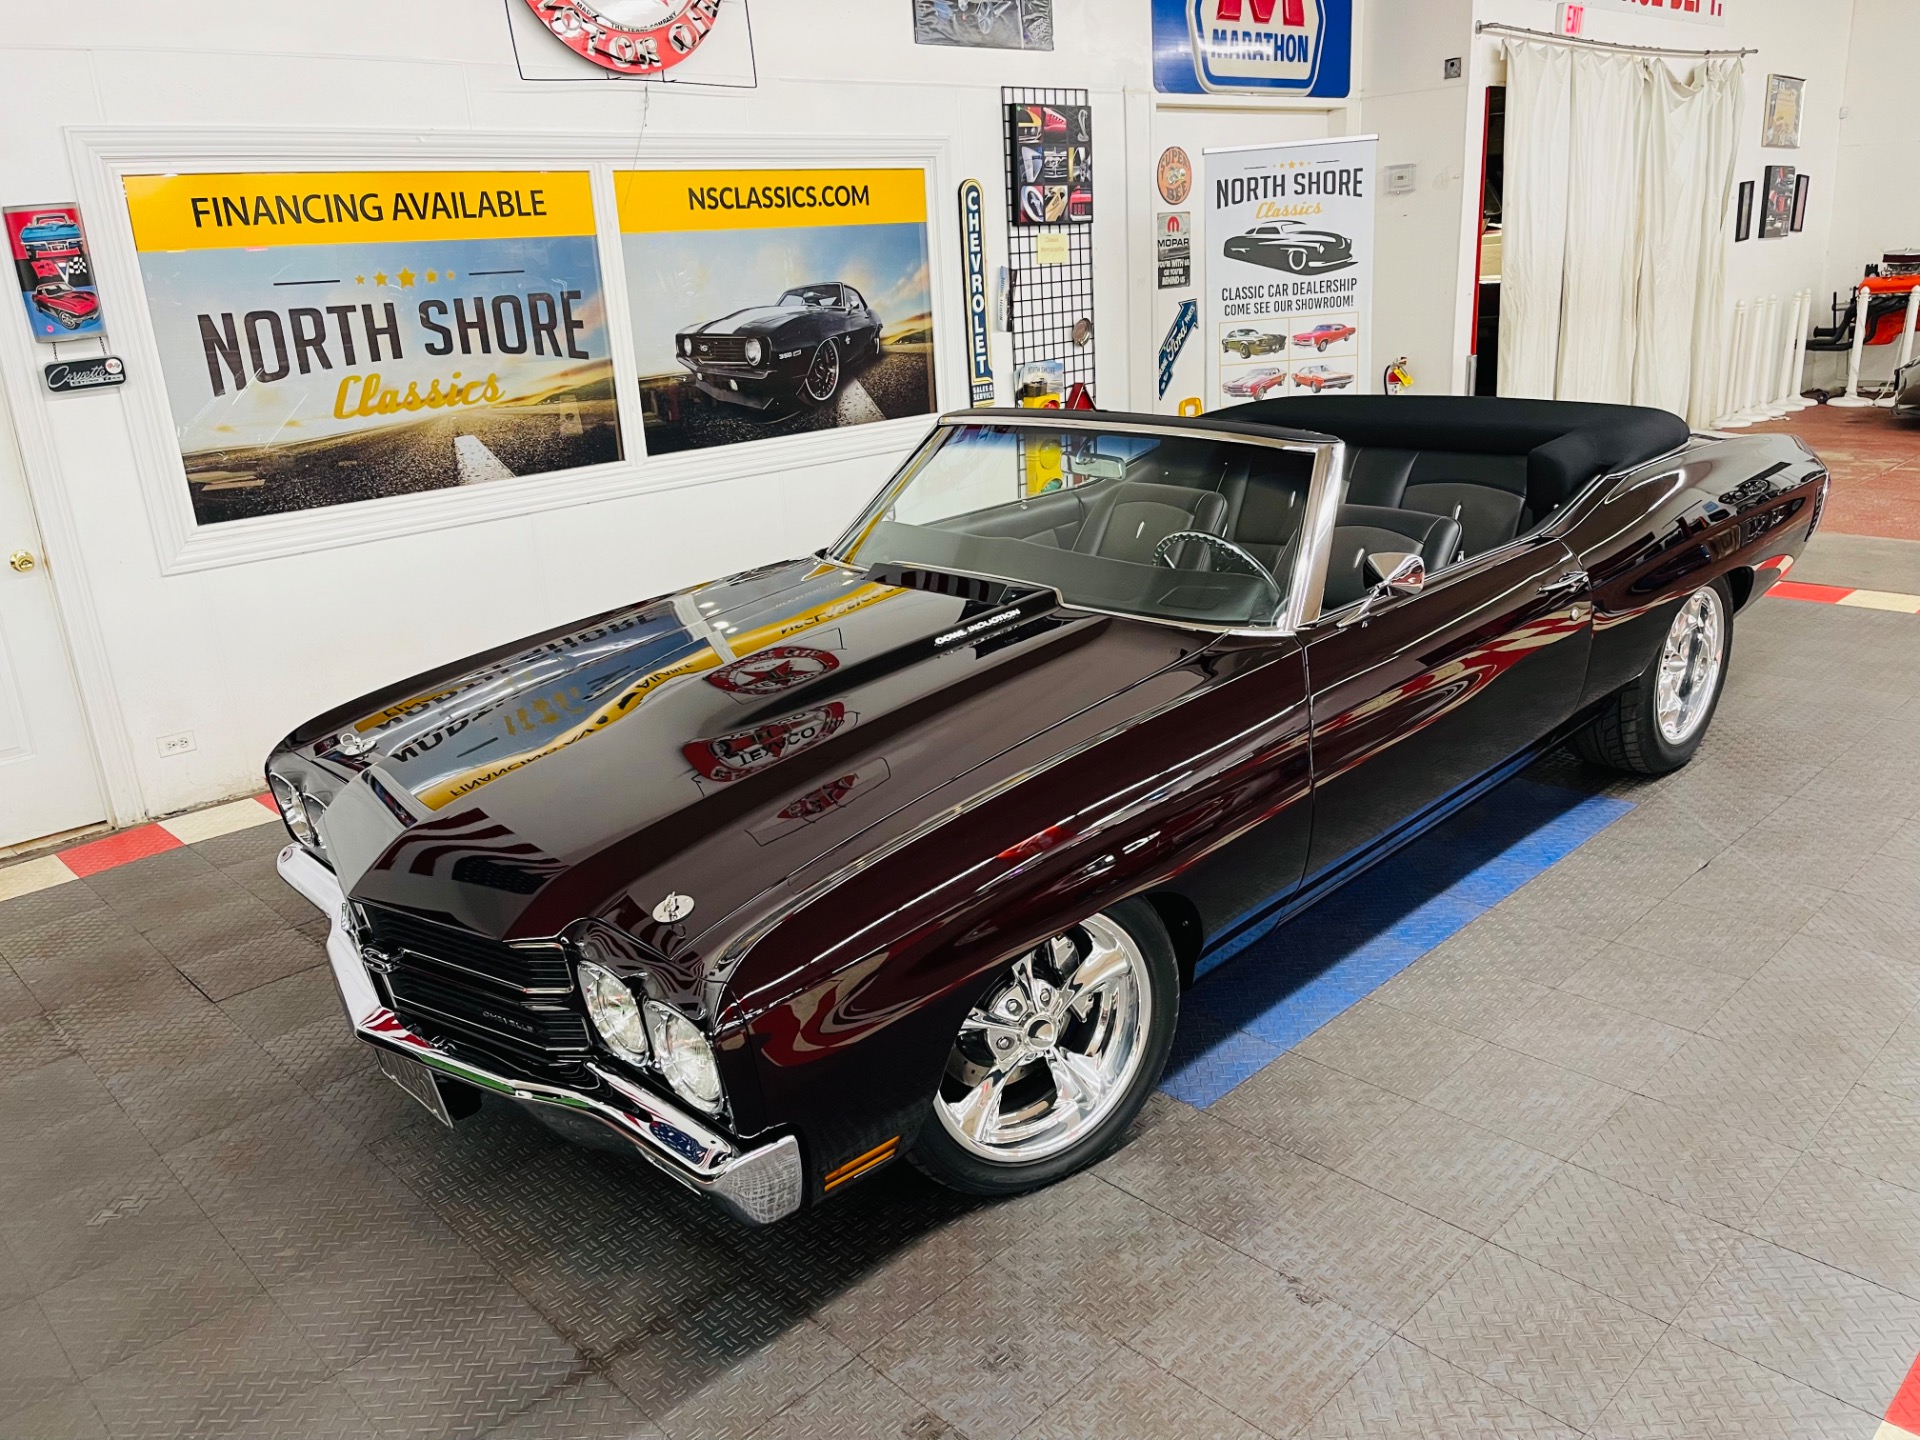 Used 1970 Chevrolet Chevelle Custom Built Show Car For Sale Sold North Shore Classics Stock